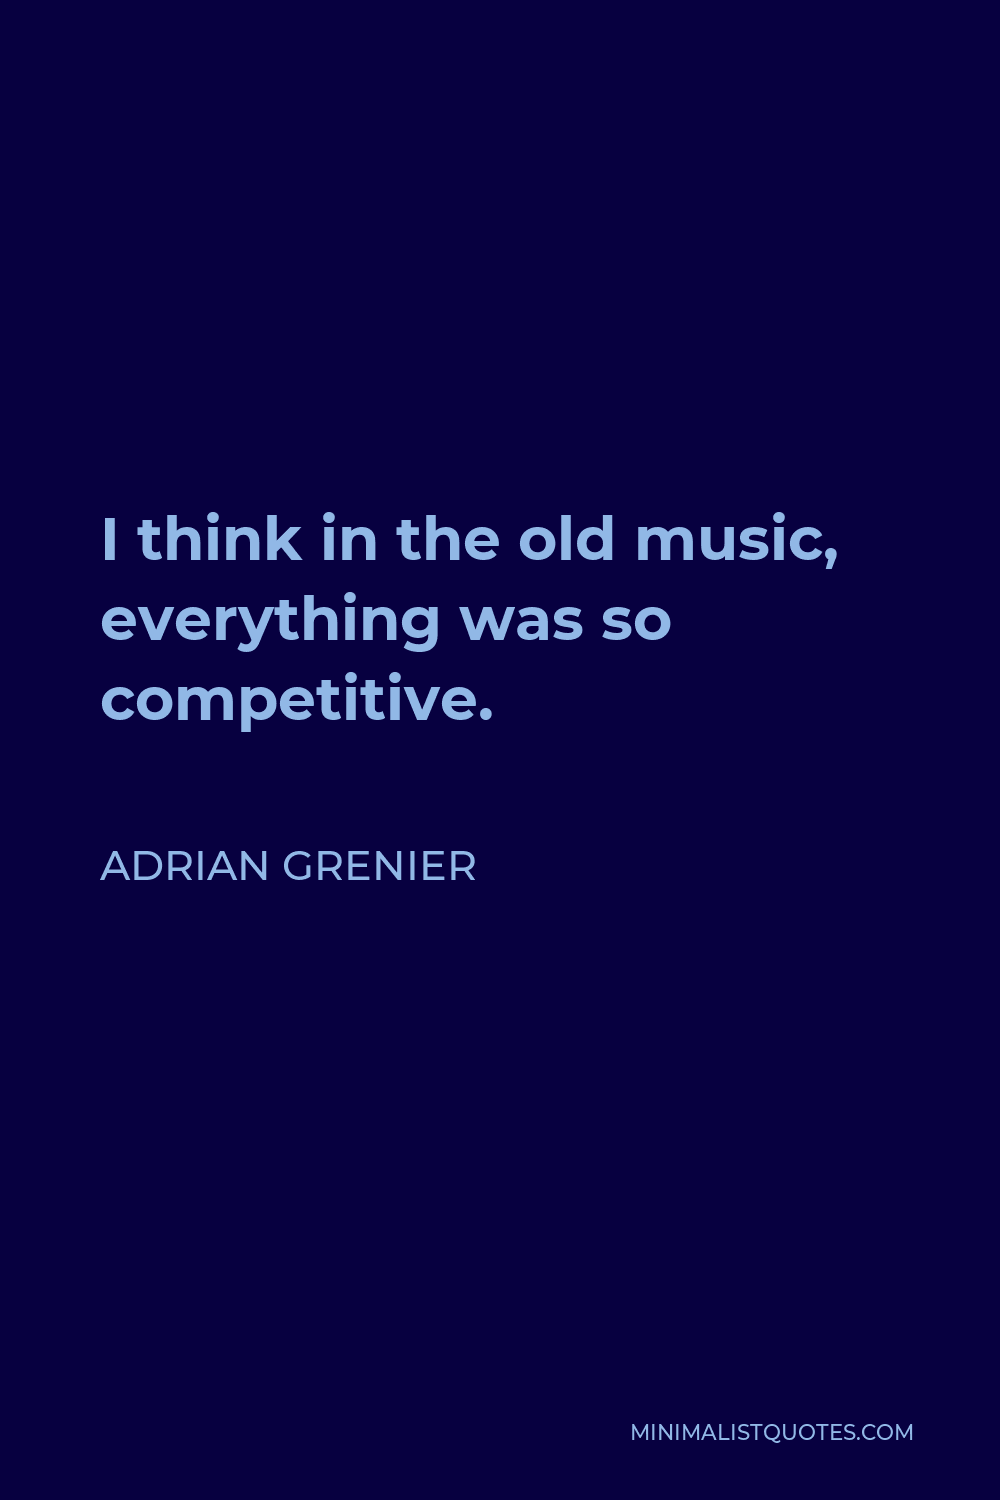 Adrian Grenier Quote - I think in the old music, everything was so competitive.